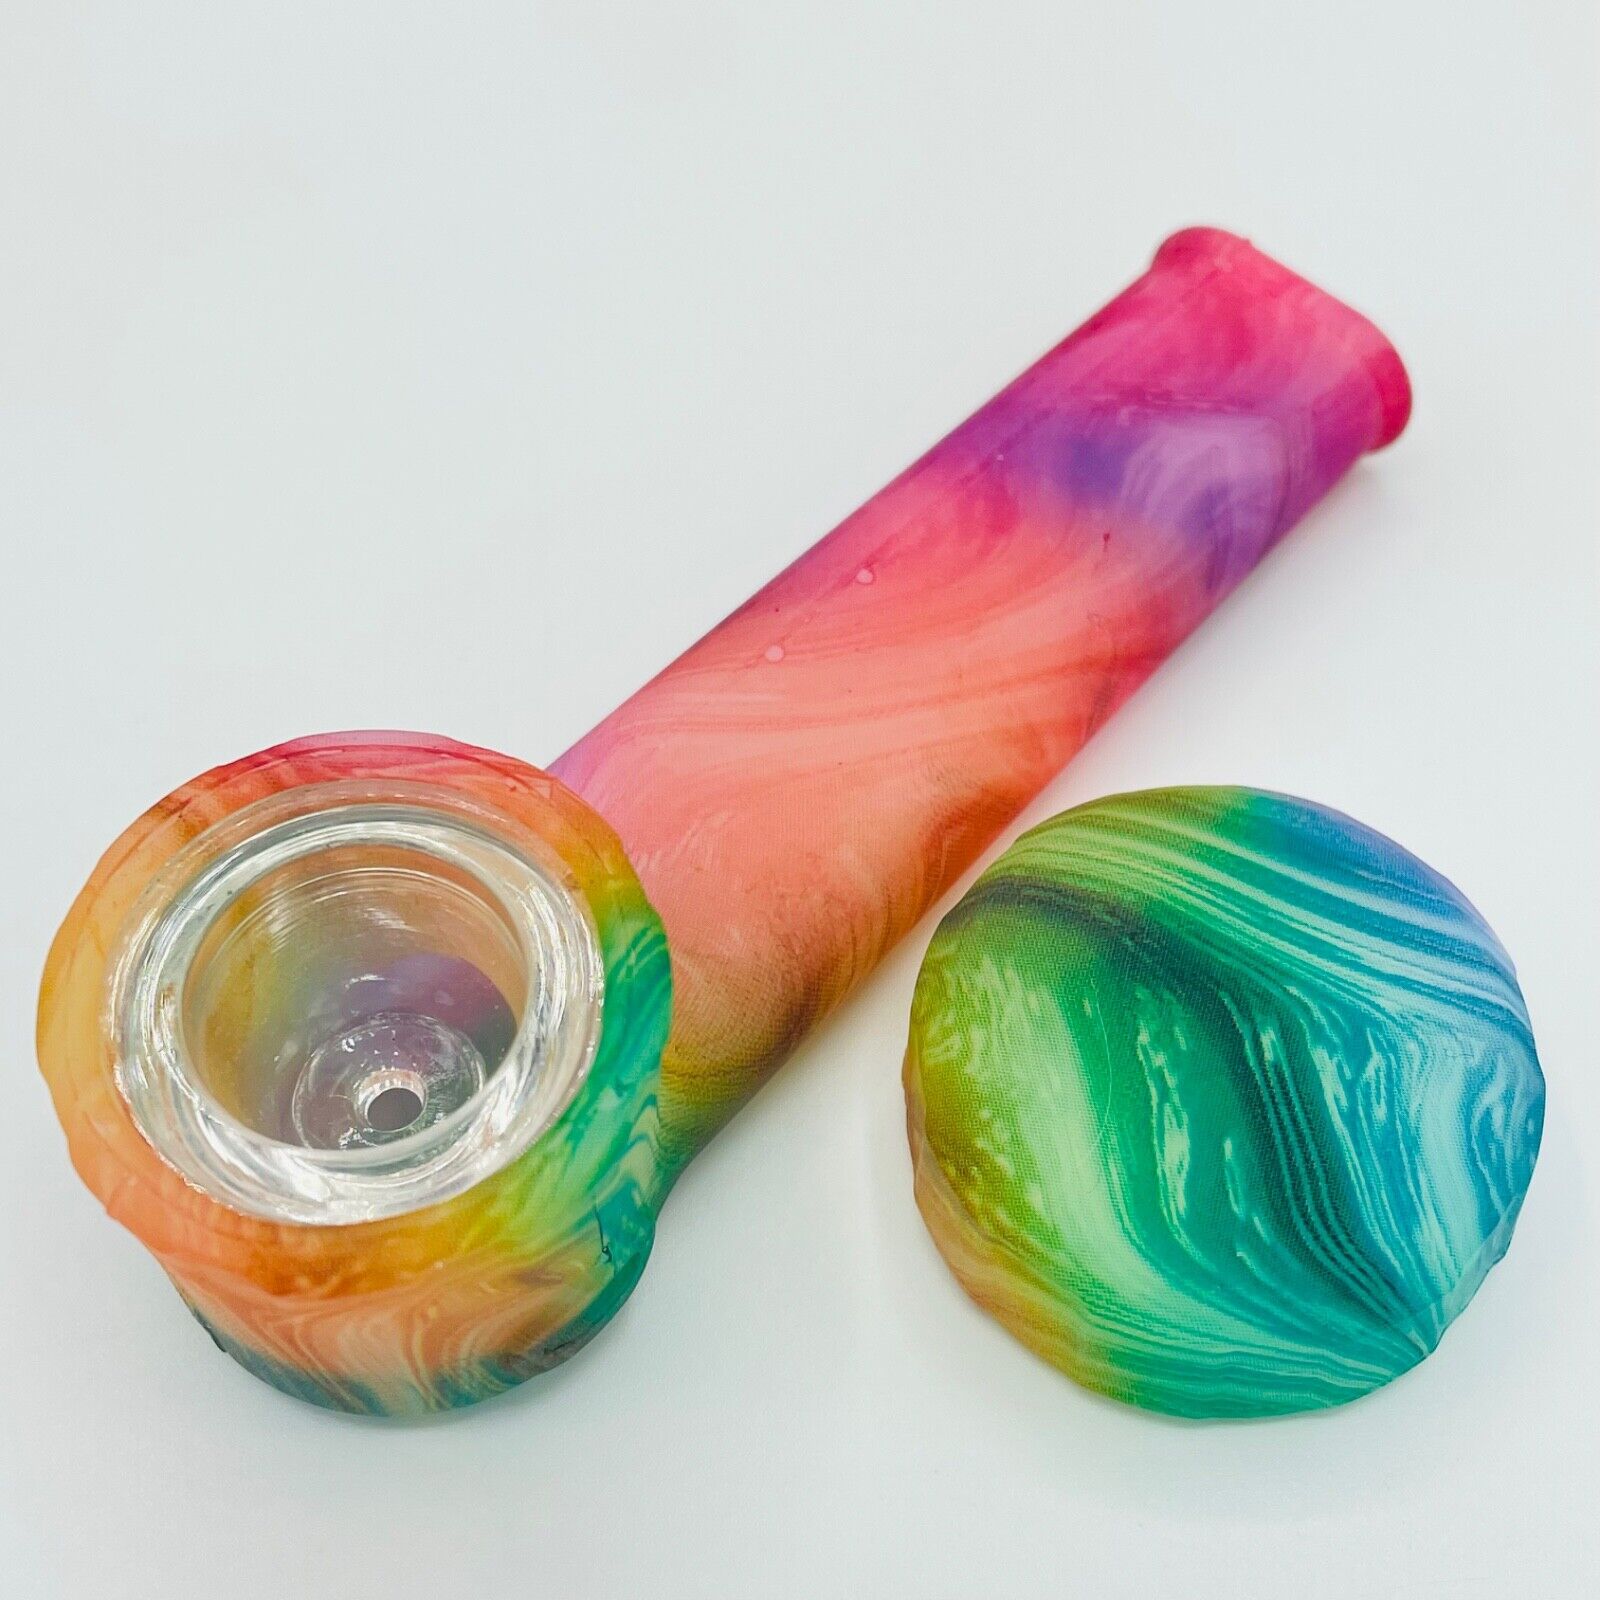 Silicone Tobacco Smoking Hand Pipe Glass Bowl Cap Lid | Glow-n-dark color swirl